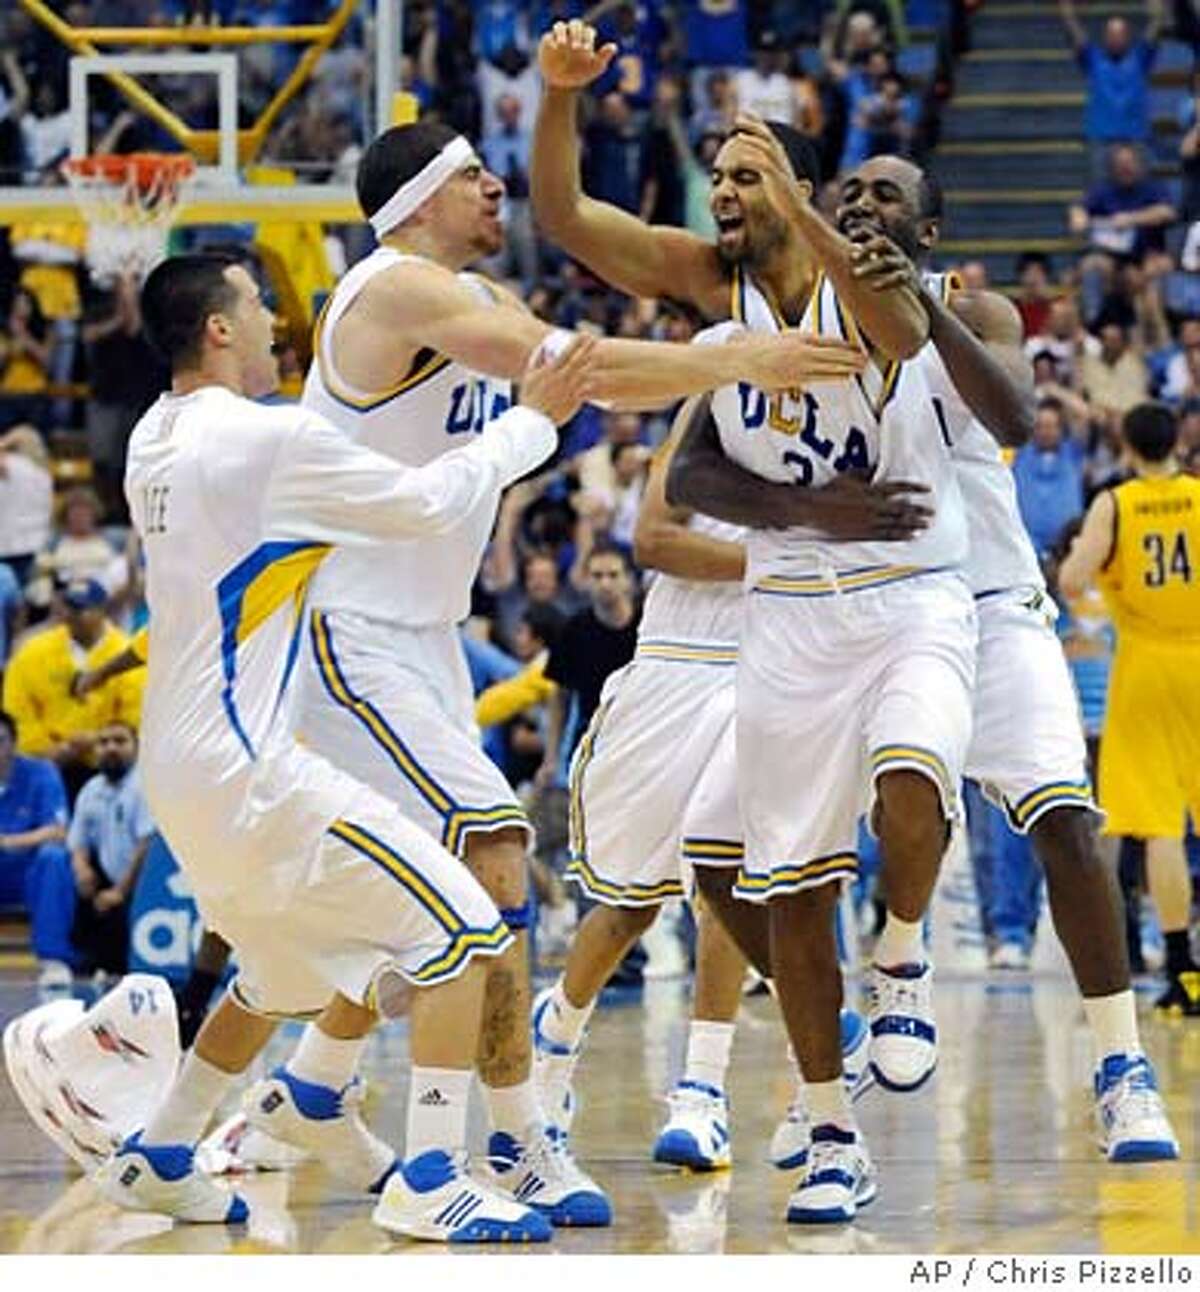 ###Live Caption:UCLA's Josh Shipp, second from right, is mobbed by teammates, from left, Matt Lee, Lorenzo Mata-Real and Luc Richard Mbah a Moute, after his last-second shot defeated California 81-80 in a basketball game in Los Angeles, Saturday, March 8, 2008. (AP Photo/Chris Pizzello)###Caption History:UCLA's Josh Shipp, second from right, is mobbed by teammates, from left, Matt Lee, Lorenzo Mata-Real and Luc Richard Mbah a Moute, after his last-second shot defeated California 81-80 in a basketball game in Los Angeles, Saturday, March 8, 2008. (AP Photo/Chris Pizzello)###Notes:Josh Shipp, Luc Richard Mbah a Moute, Matt Lee, Lorenza Mata-Real###Special Instructions:EFE OUT